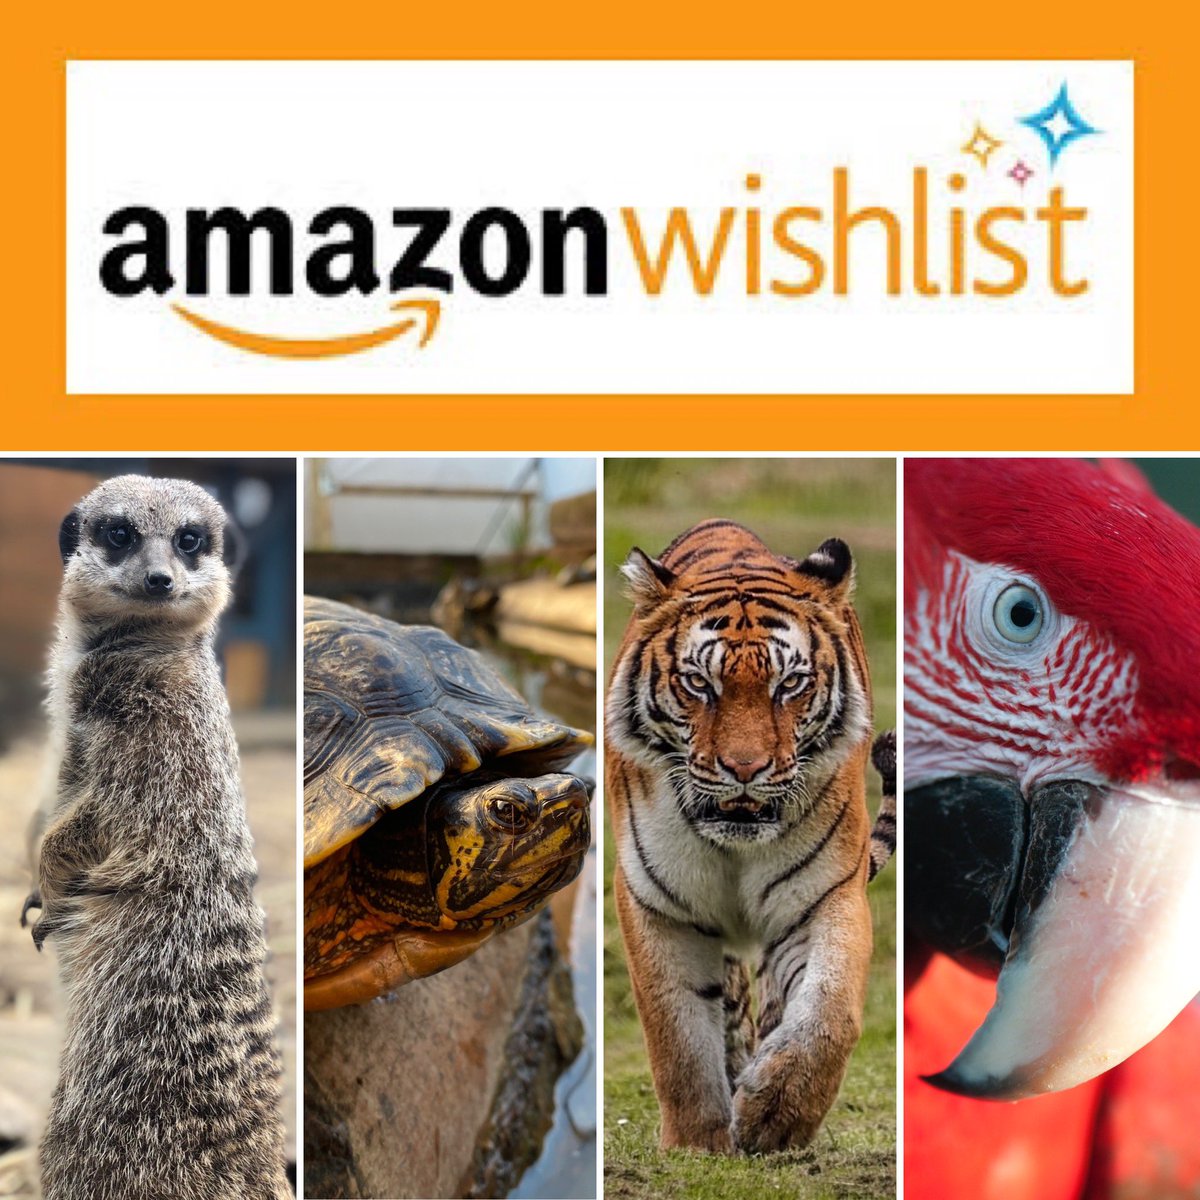 ⭐️New items added⭐️
Check out our #Amazon #wishlist to buy your favourite animal or bird a #gift 
Click the link to take a l👀k ⬇️
amazon.co.uk/hz/wishlist/ls… 

#LincsConnect #Lincolnshire #skegness #sanctuary #charity #lincswildlifepark #parrots #animals